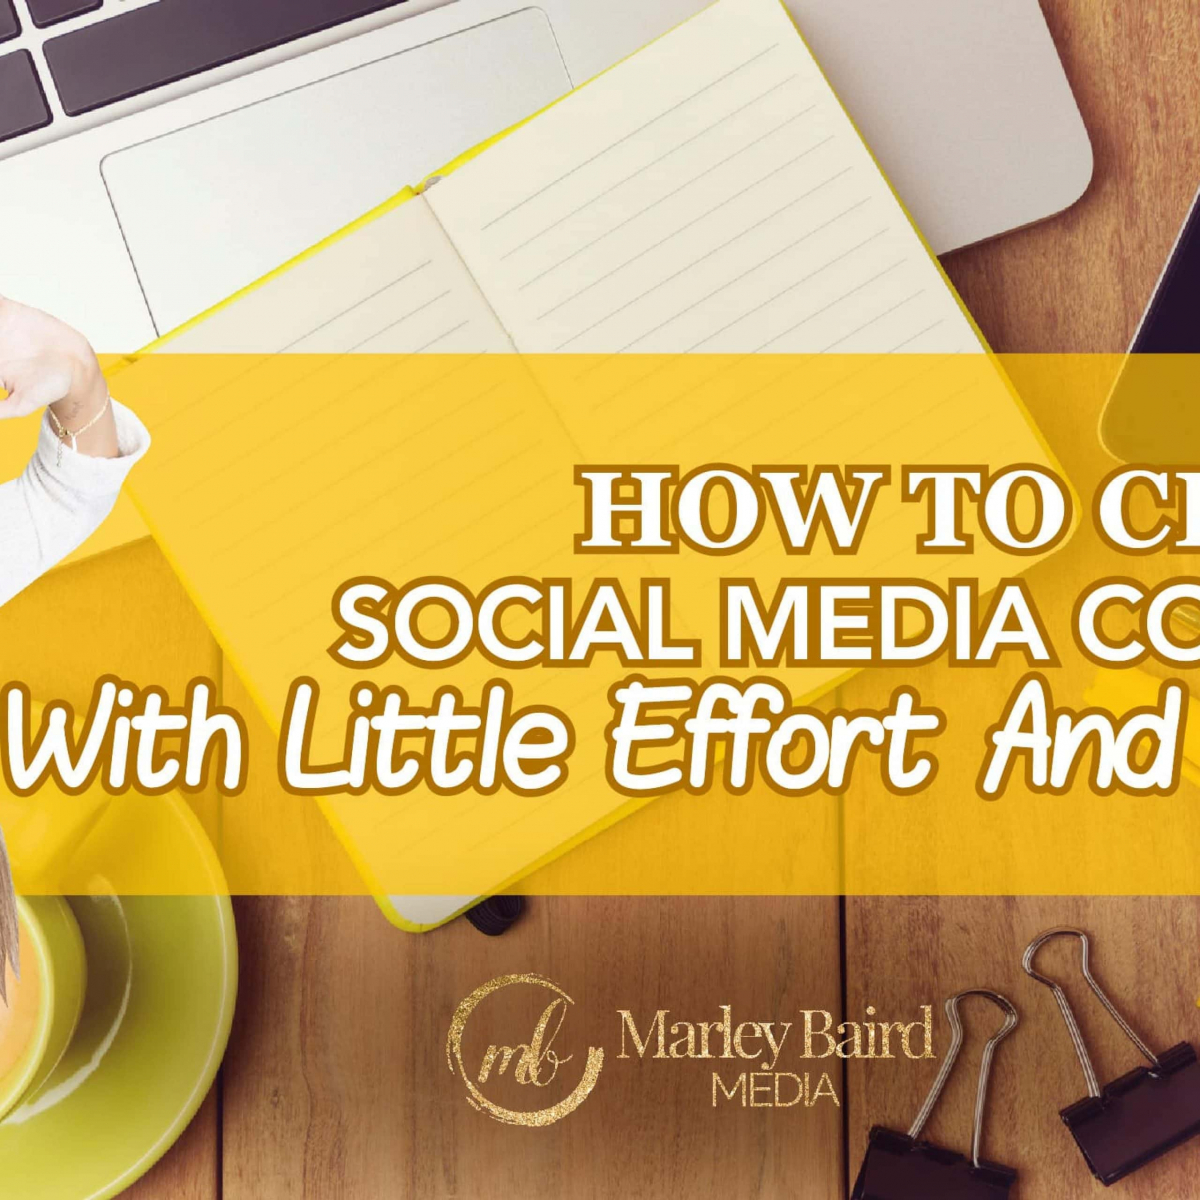 how-to-create-social-media-content-with-little-effort-and-money